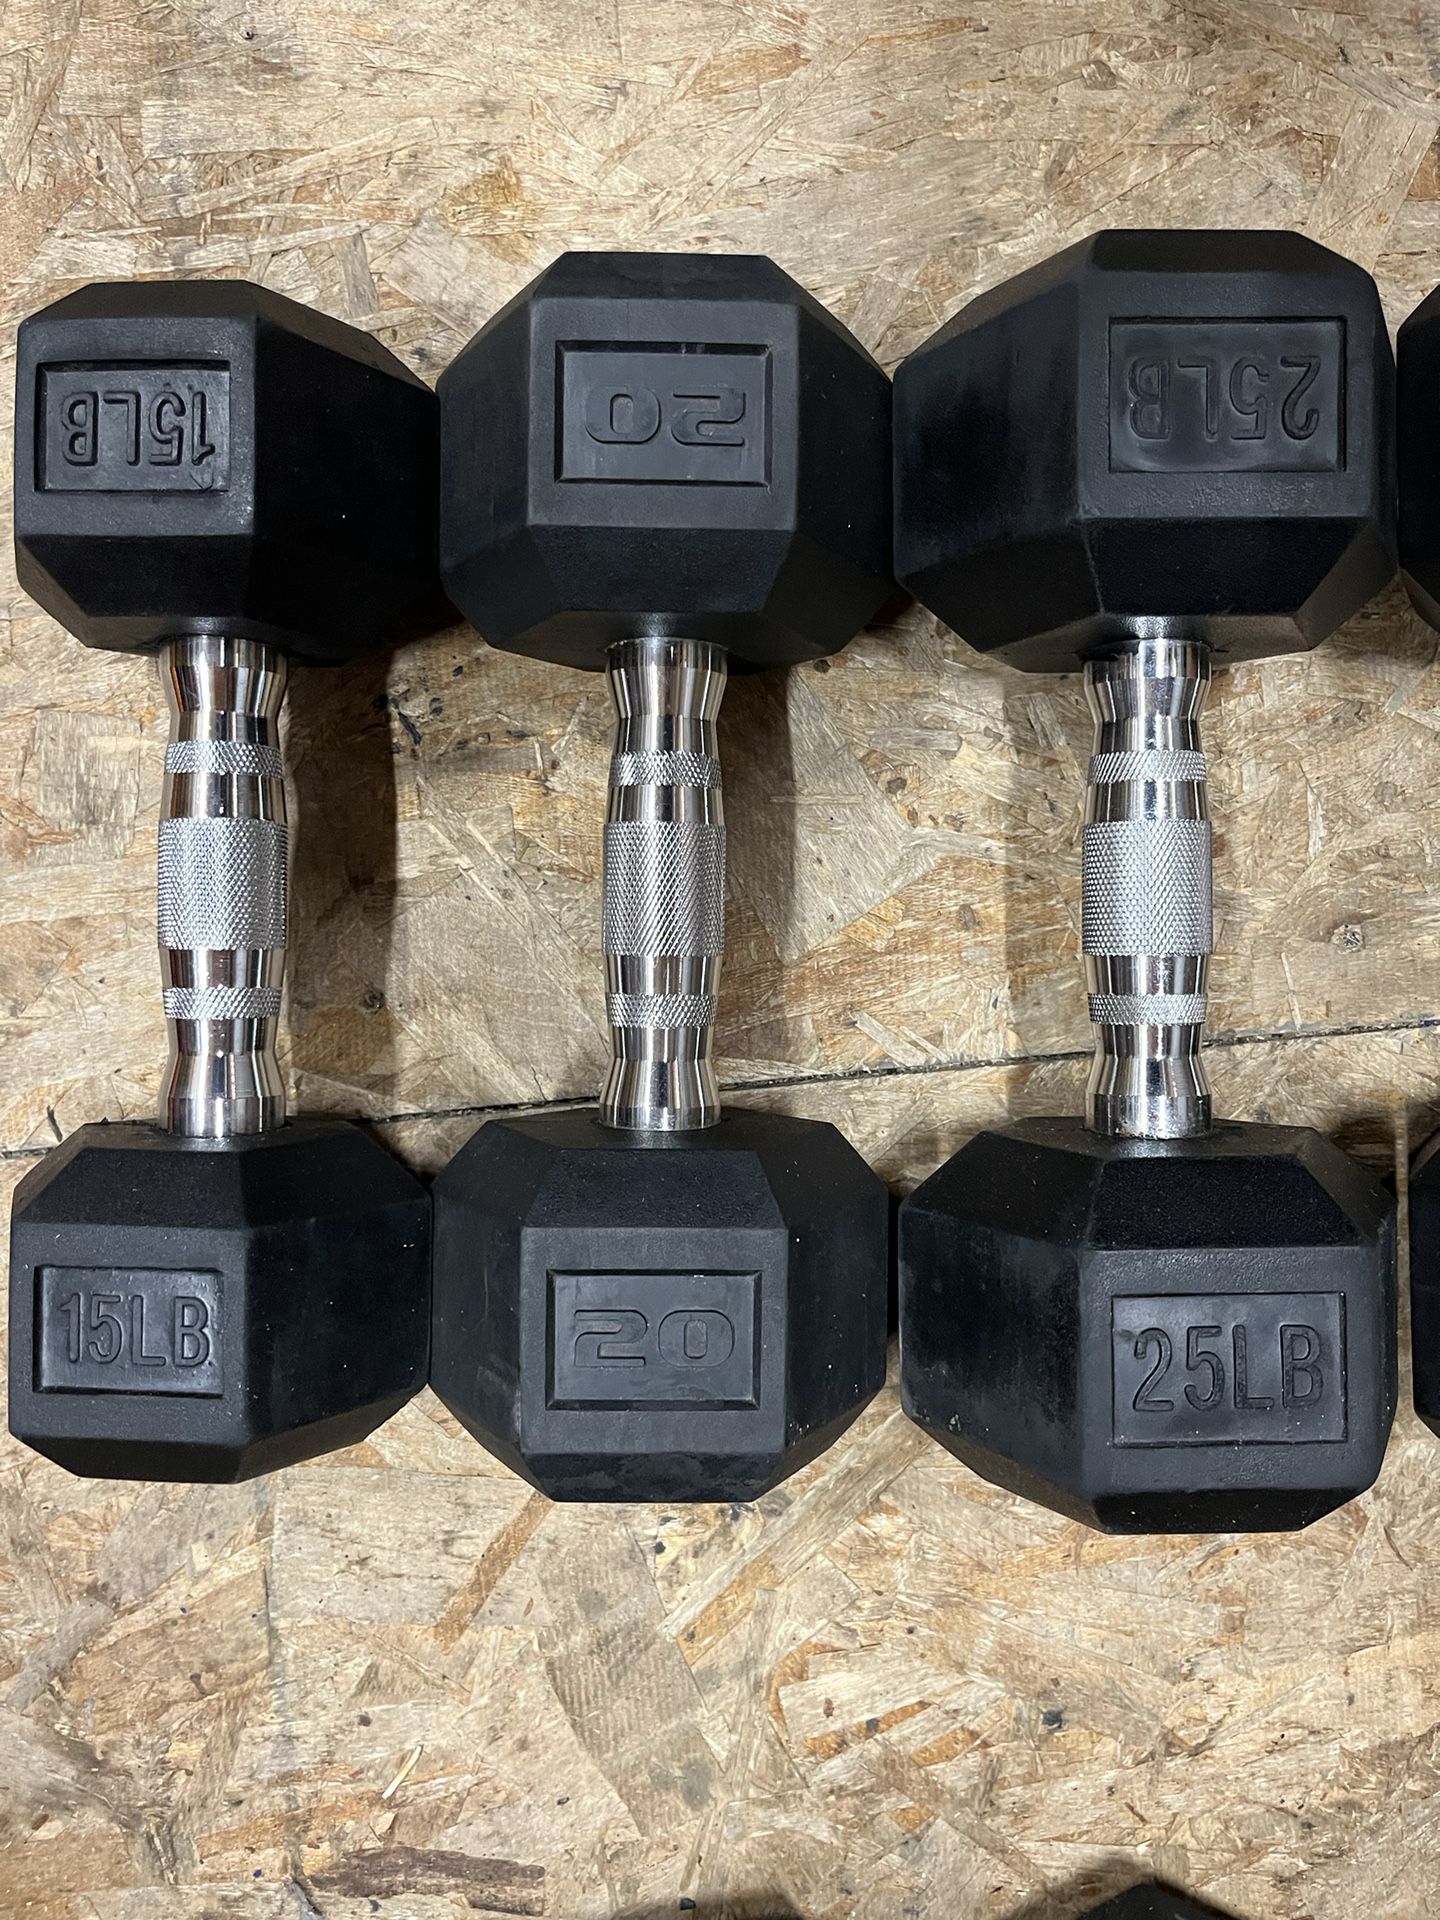 Hex Dumbbell Set $600 For 400lbs